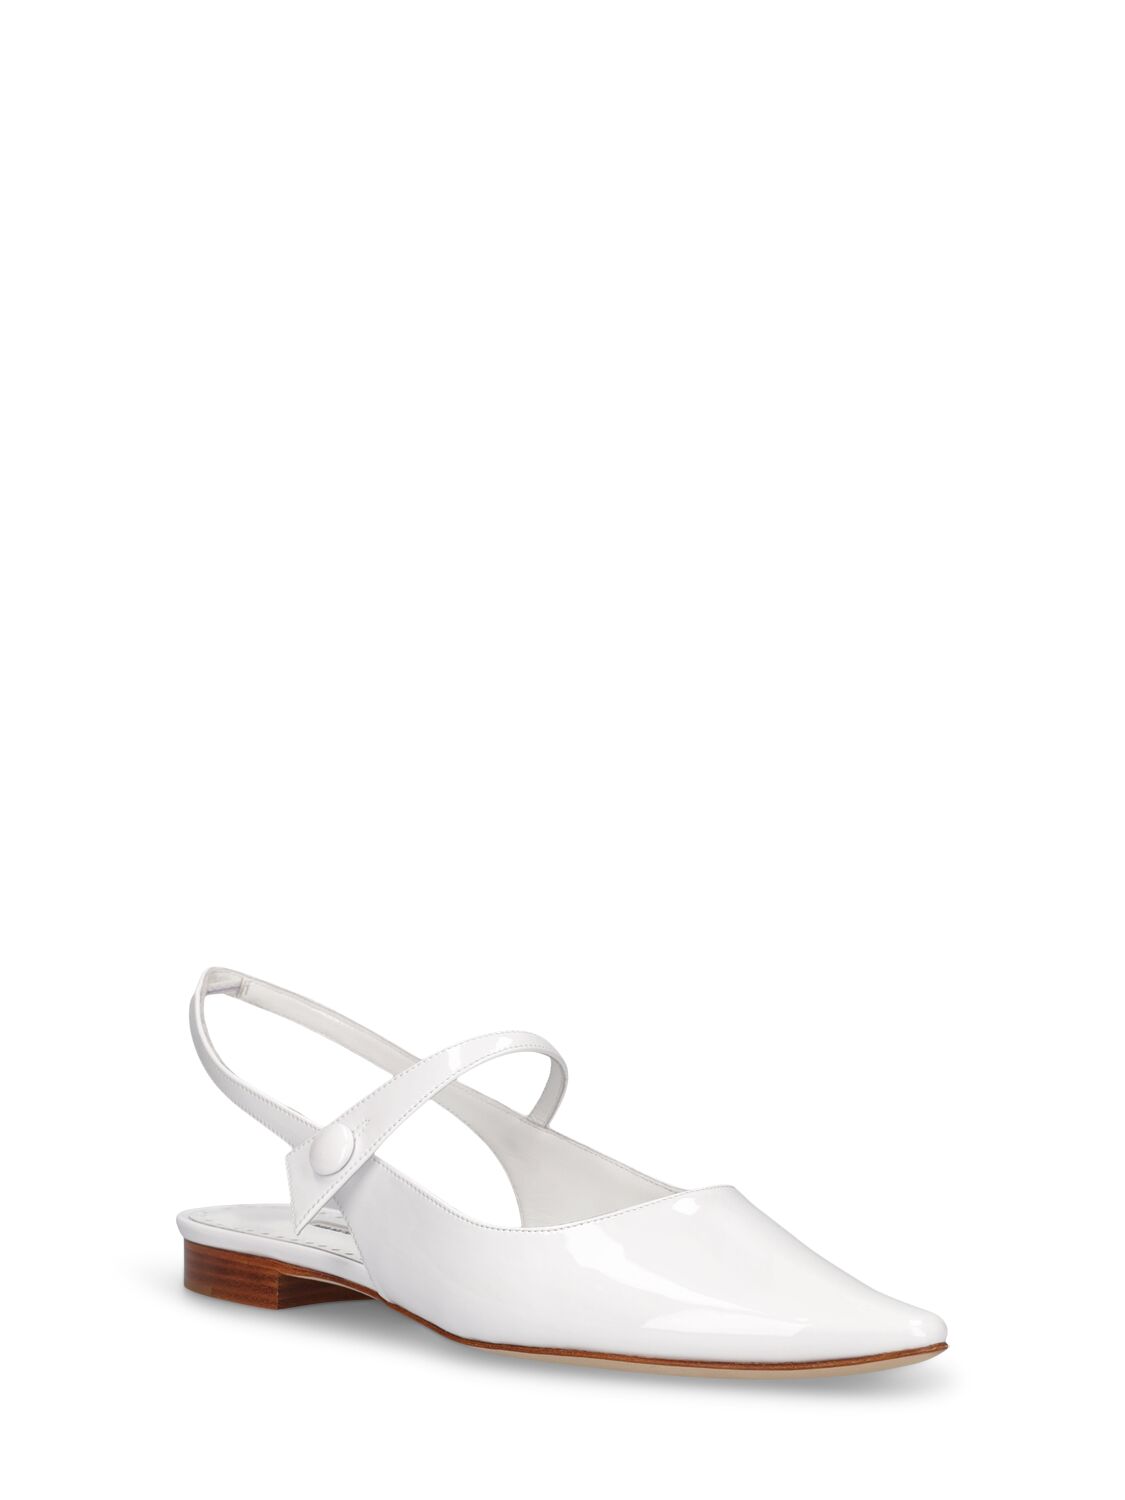 Shop Manolo Blahnik 10mm Didionflat Patent Leather Flats In White